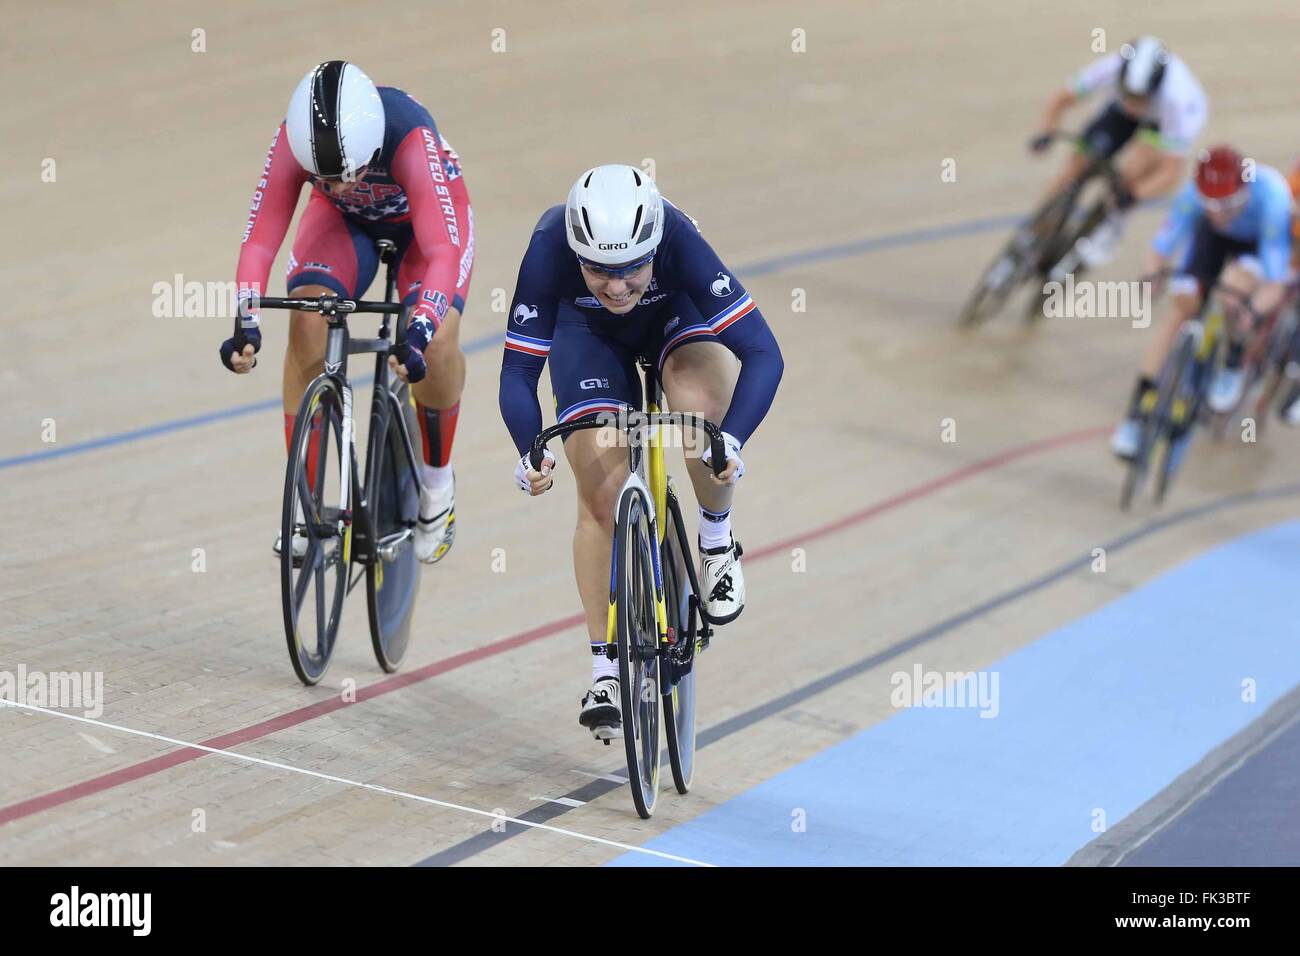 Lee Valley Velo Centre, Lonodn UK. 6. März 2016. UCI Track Cycling World Championships Womens Womens Omnium. Laurie Berthon (FRA) Frankreich silberne Medaillenträger Credit: Action Plus Sport/Alamy Live News Stockfoto